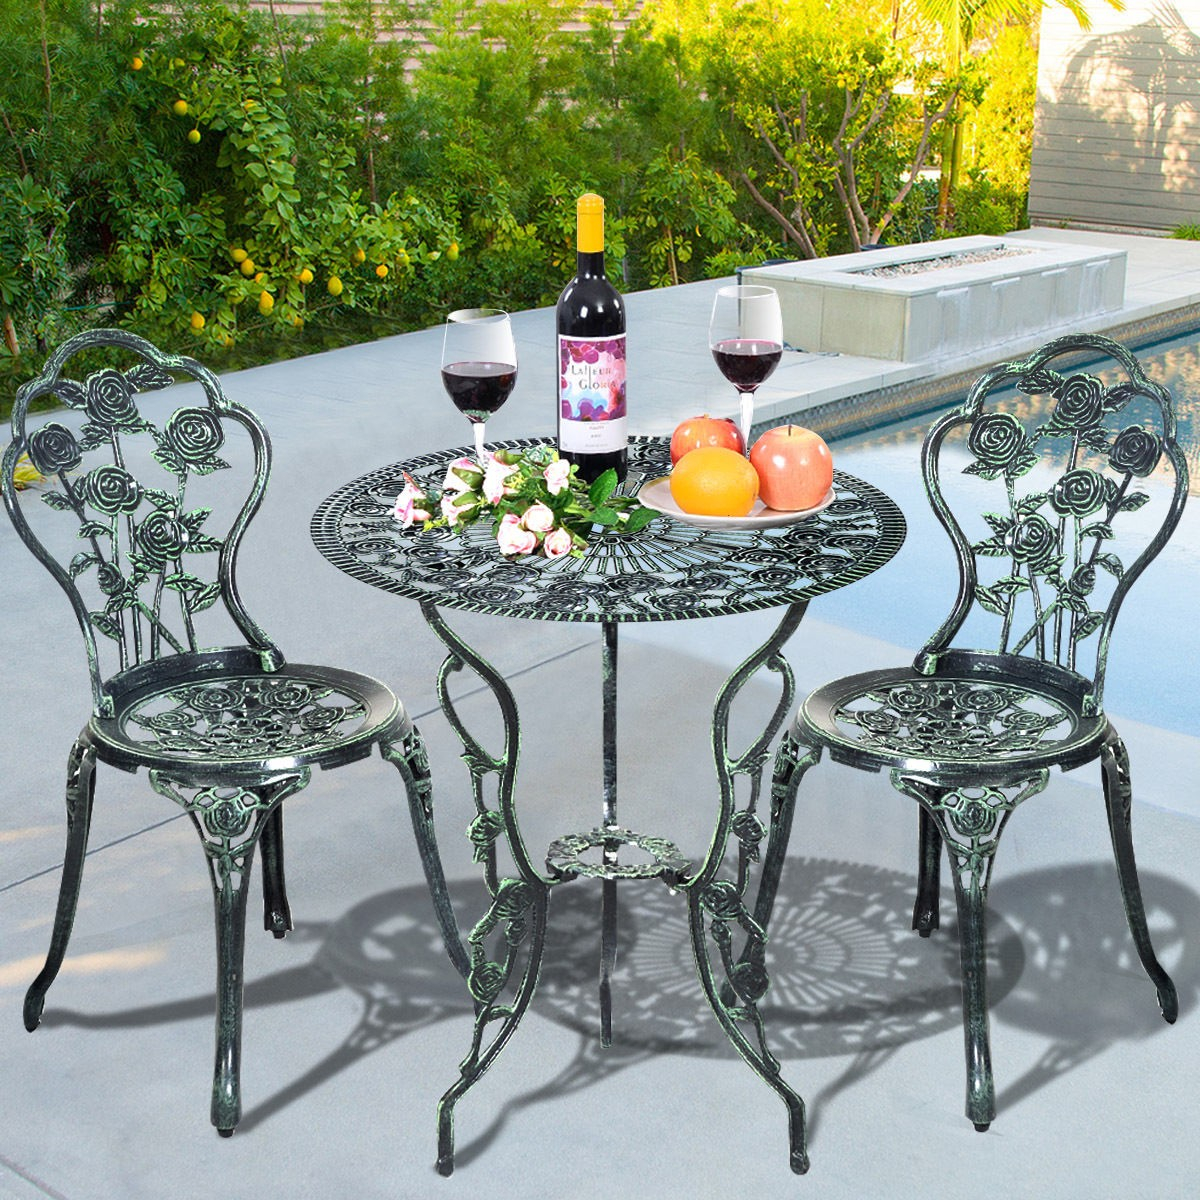 Details About Outdoor Patio Garden Rose Design Bistro Table Chair Set Retro Antique Furniture pertaining to size 1200 X 1200